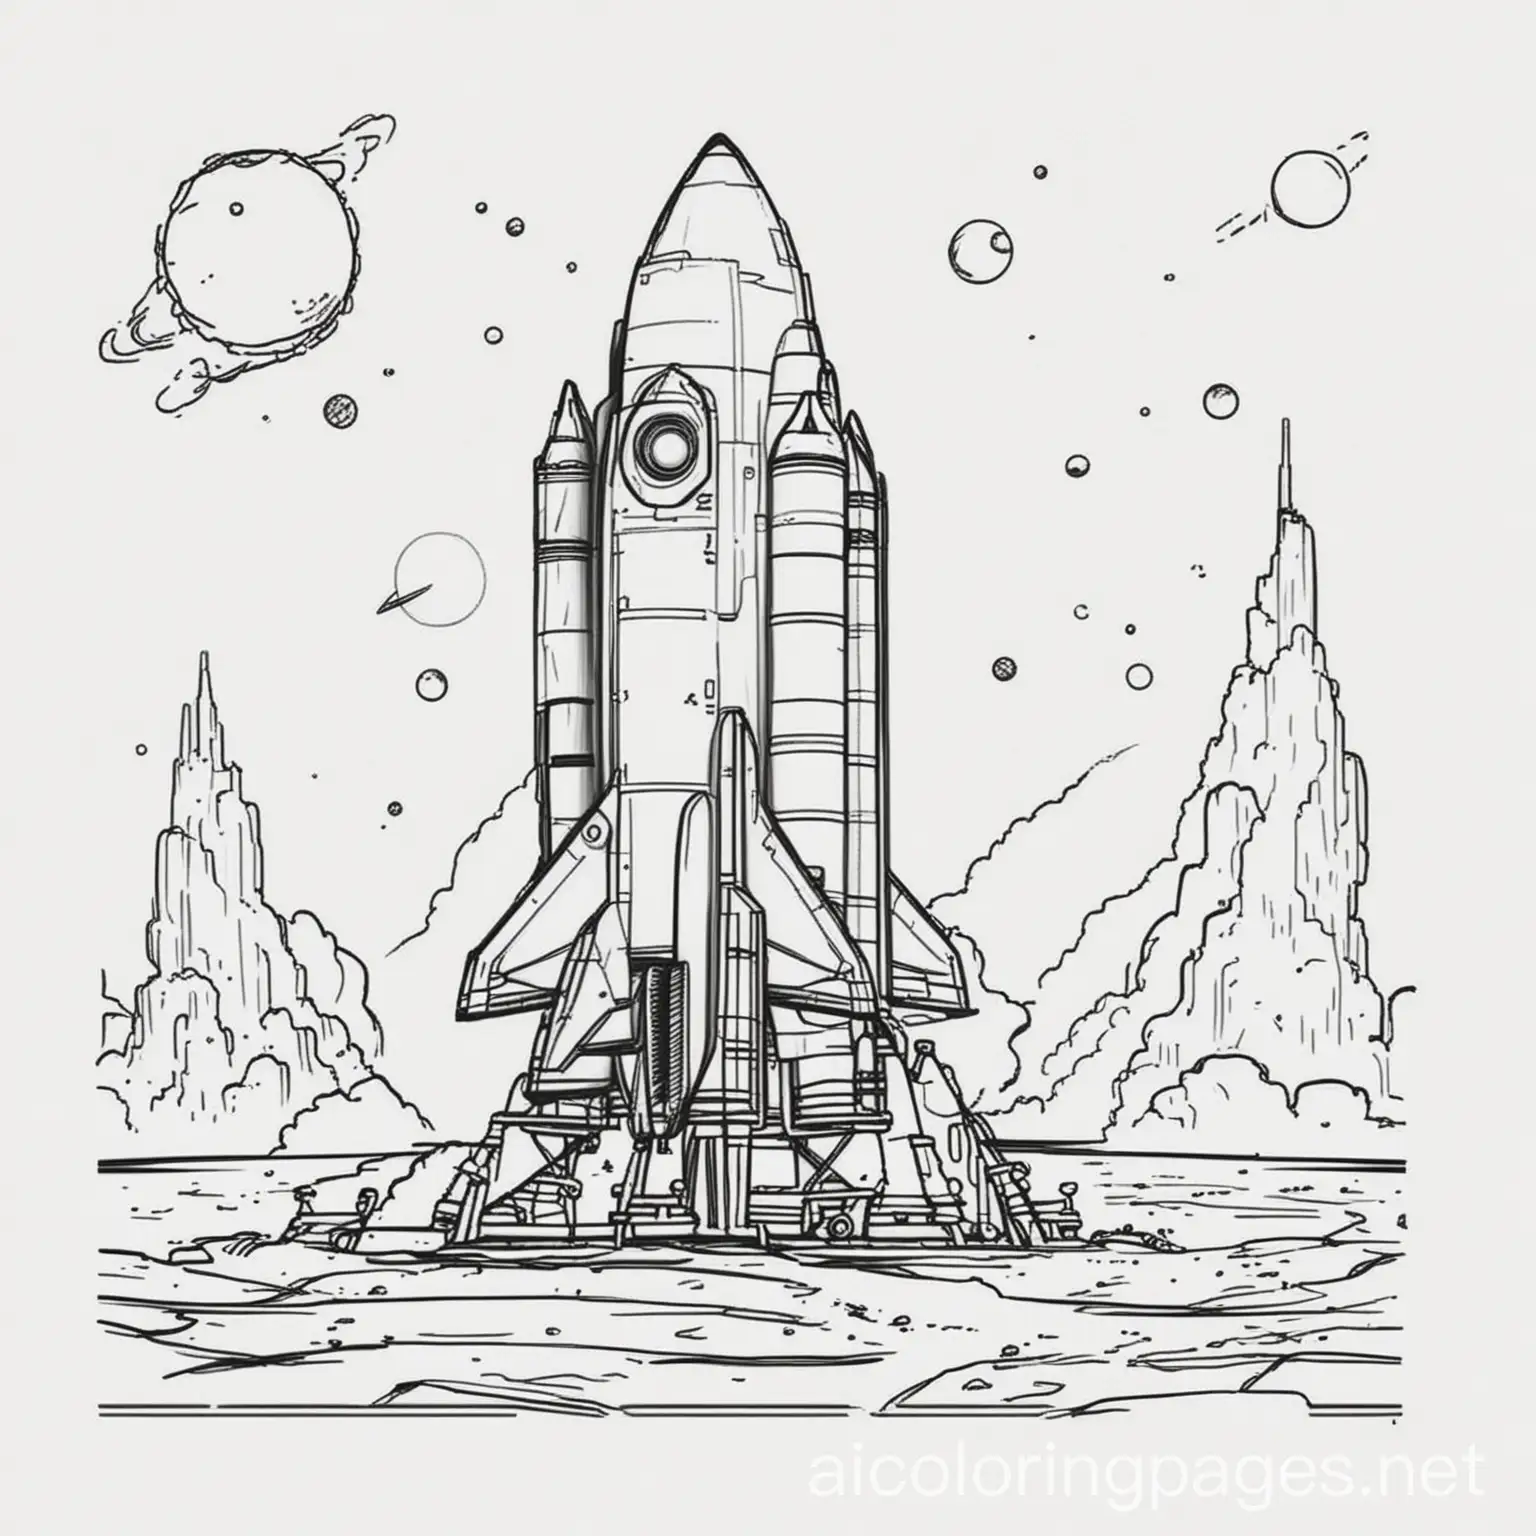 A rocket launch pad ready for lift-off, coloring page, black and white, line art, white background, Simplicity, Ample White Space. The background of the coloring page is plain white to make it easier for children to color within the lines. The outlines of all the subjects are easy to distinguish, making it simple for kids to color without too much difficulty. There should be planets on the background to color, Coloring Page, black and white, line art, white background, Simplicity, Ample White Space. The background of the coloring page is plain white to make it easy for young children to color within the lines. The outlines of all the subjects are easy to distinguish, making it simple for kids to color without too much difficulty